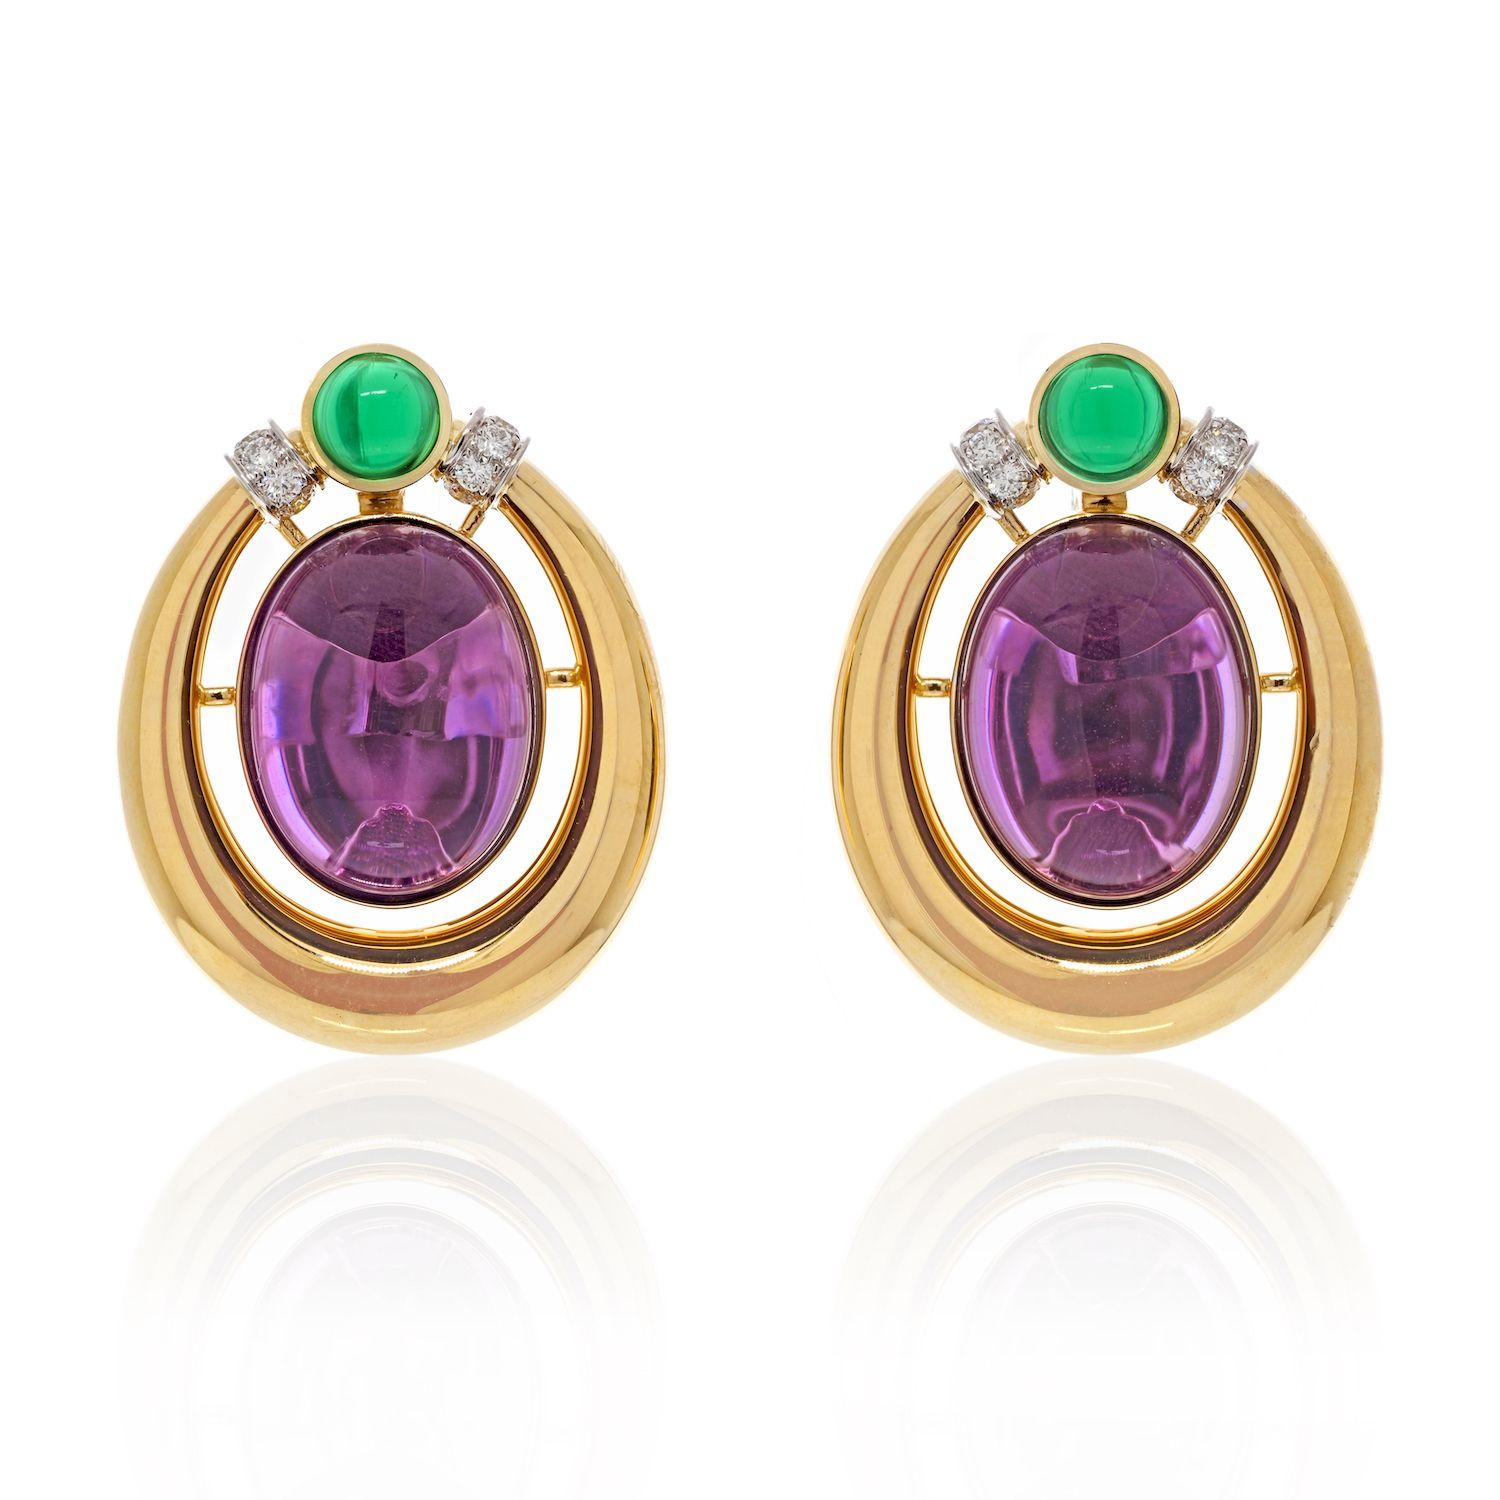 Impressive vintage gold clip earrings by David Webb mounted with cabochon amethysts, emeralds, and pave round cut diamonds. High polished yellow gold door knocker attached to the frame.
Length: 39mm
Width: 30mm
Clip-on style.